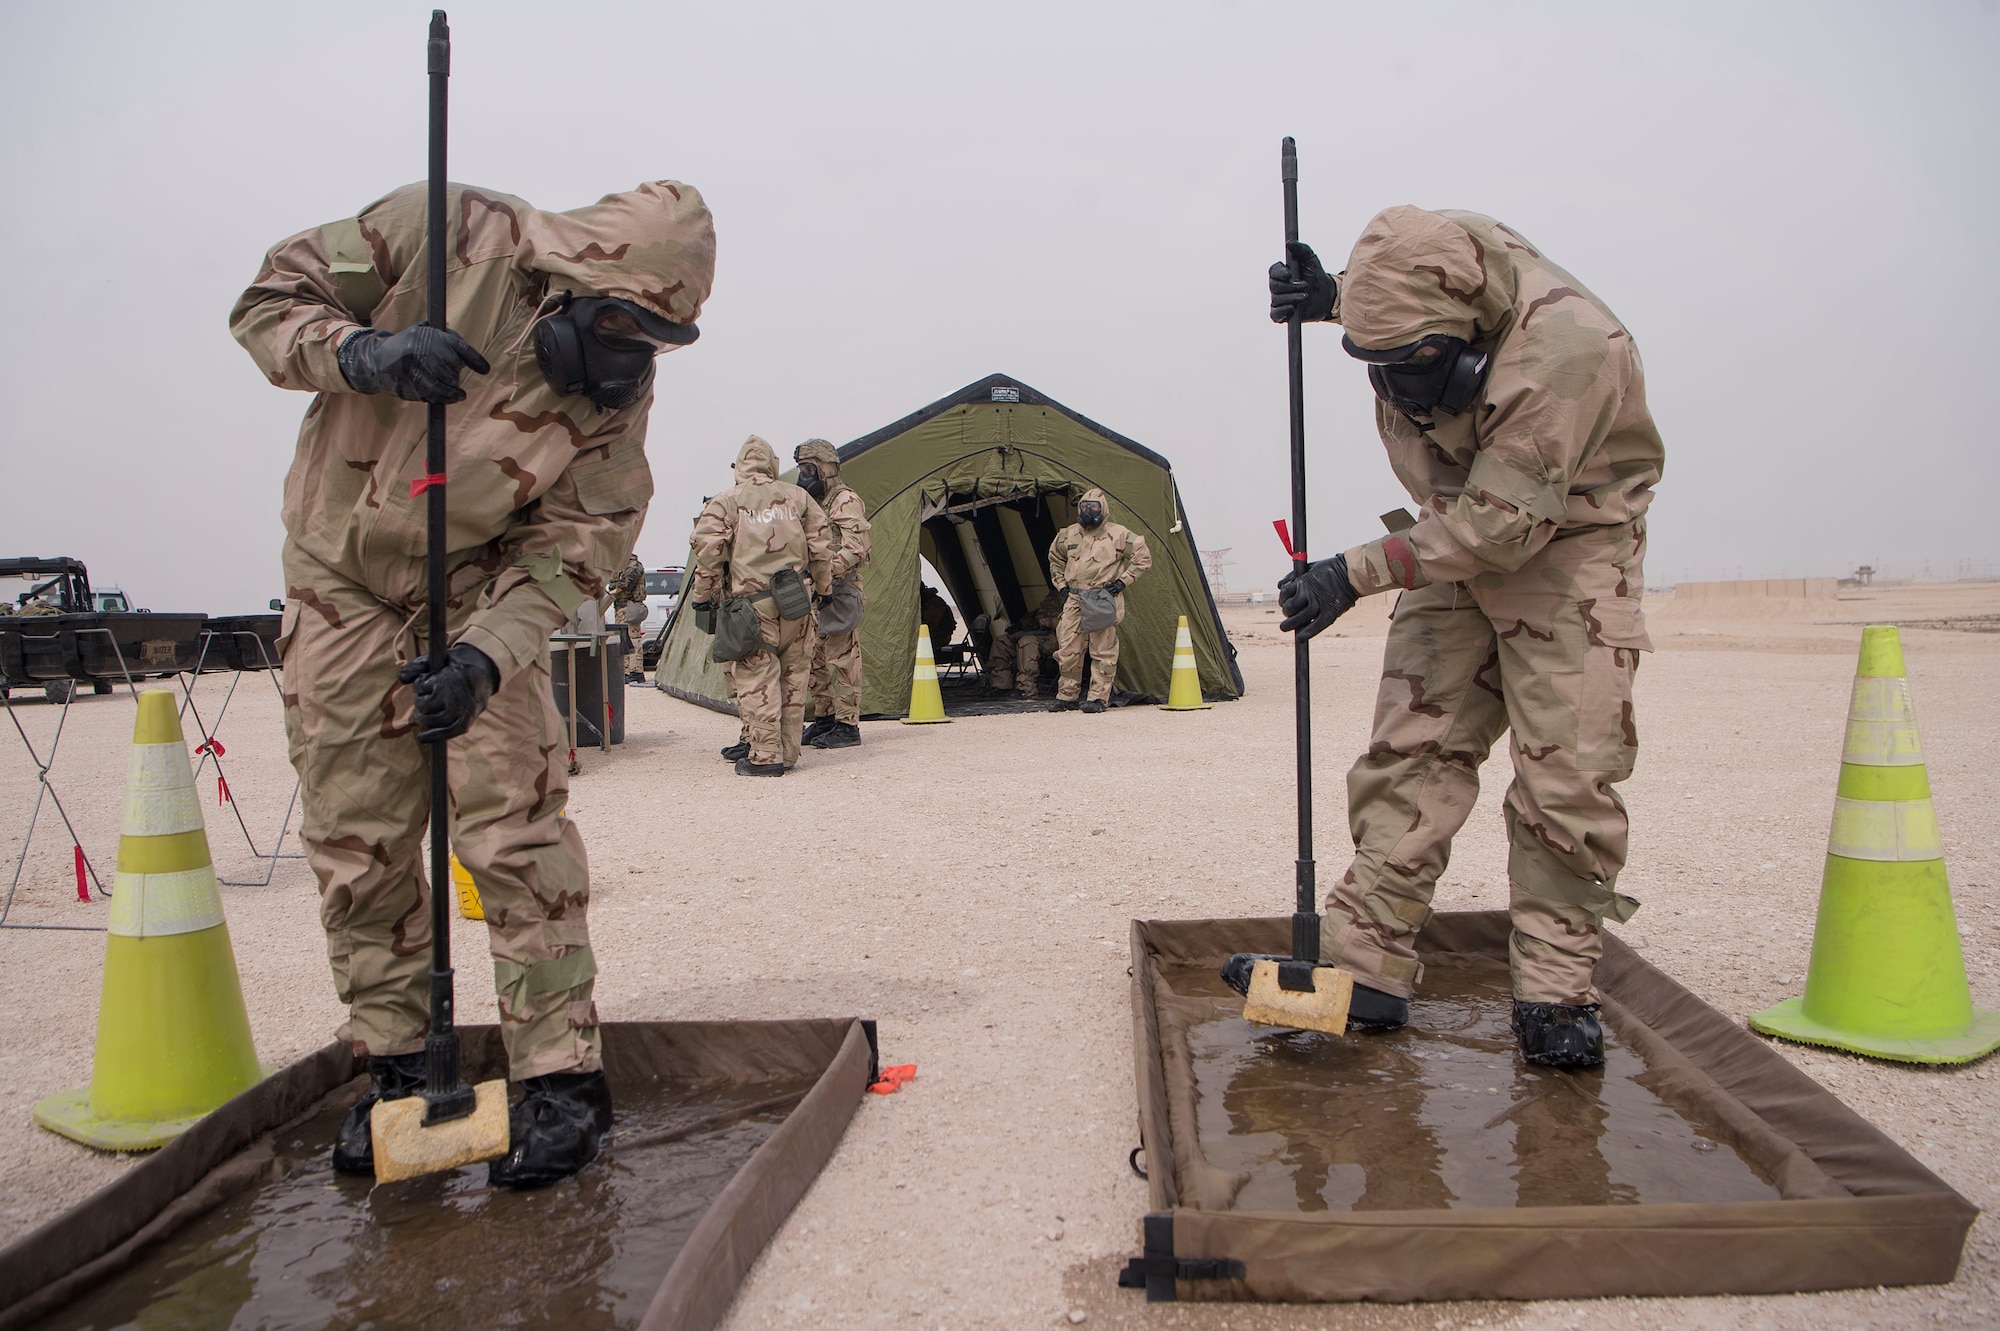 U.S. Army Soldiers of the 1st Battalion, 43rd Air Defense Artillery (ADA) regiment, 11th ADA Brigade, perform Chemical, Biological, Radiological, Nuclear, and high yield explosives (CBRNE) decontamination techniques during a ground survey as part of a joint decontamination exercise Feb. 22, 2019, at Al Udeid Air Base, Qatar. U.S. Air Force and Army participants from the 379th Expeditionary Civil Engineer Squadron and the 1-43rd ADA, shared CBRNE best practices, and tested their response proficiency during the training. The event was the conclusion of a four phase training curriculum. (U.S. Air Force photo by Tech. Sgt. Christopher Hubenthal)